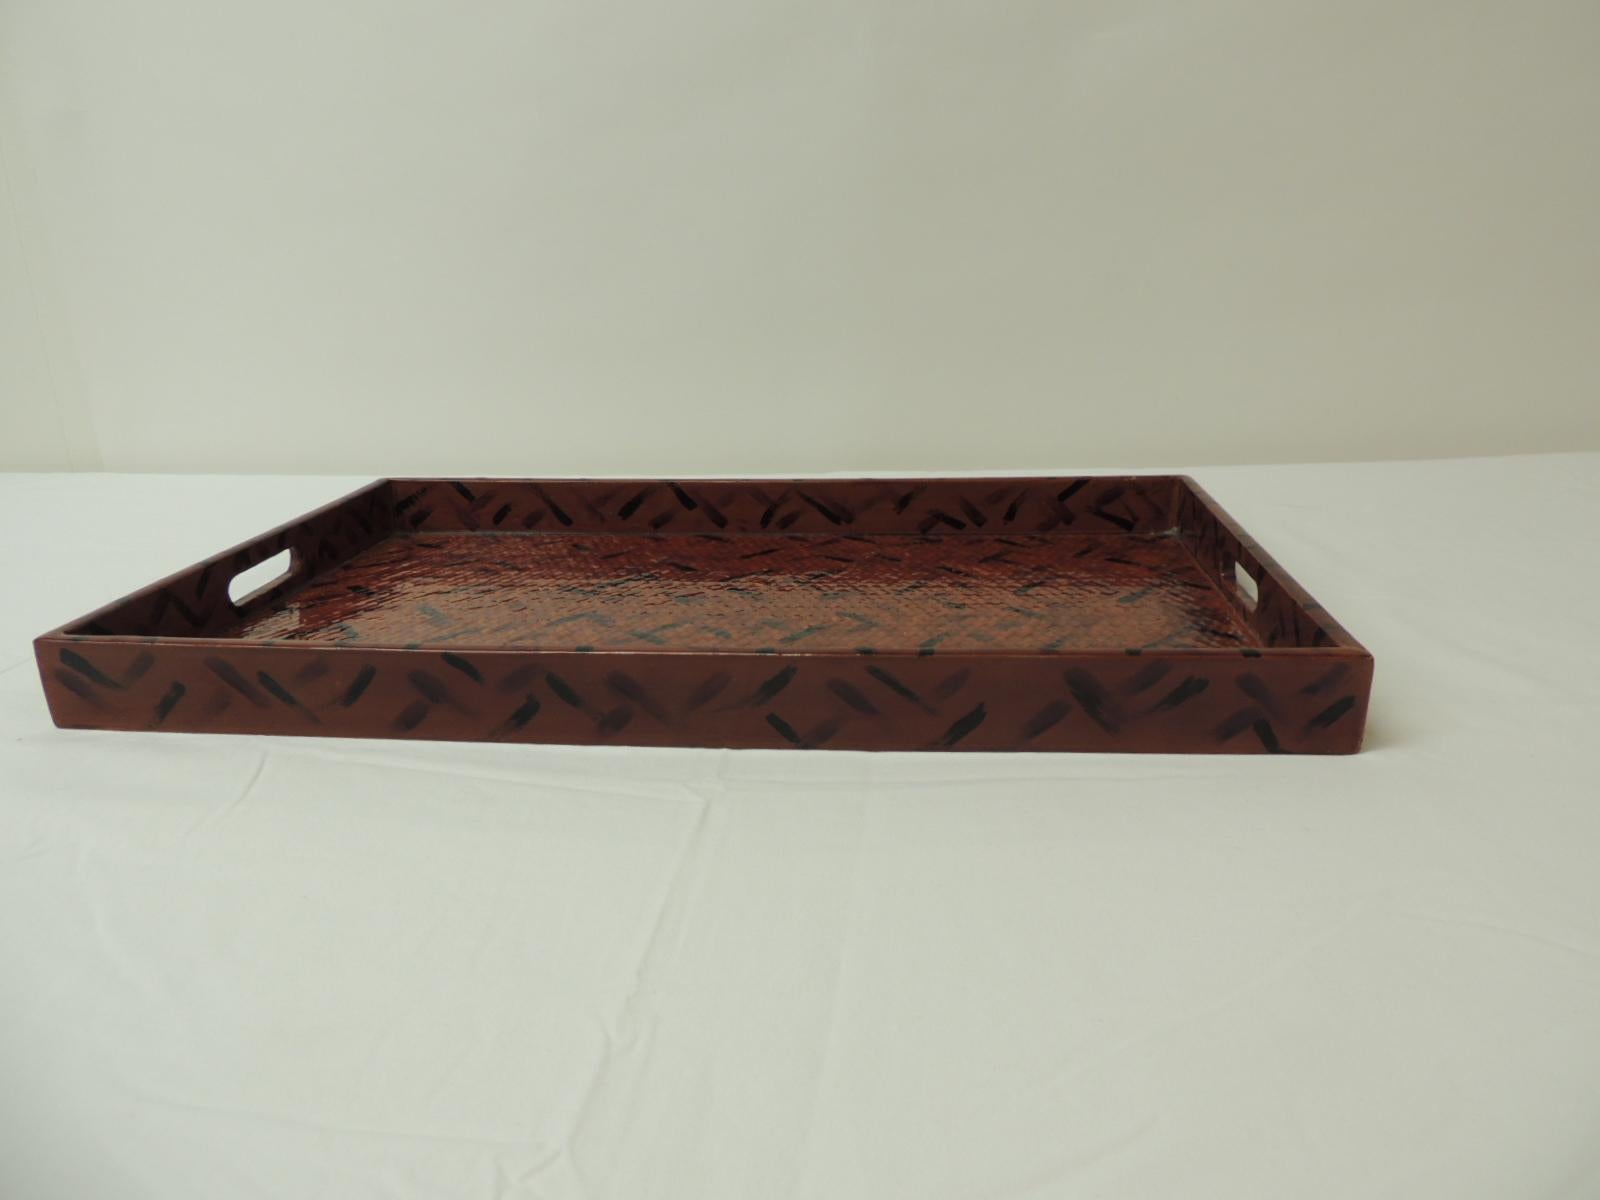 Faux tortoise finish lacquered rattan serving tray with open handles.
Is big enough to hold books or magazines.
Size: 12 x 20 x 1.5 H.